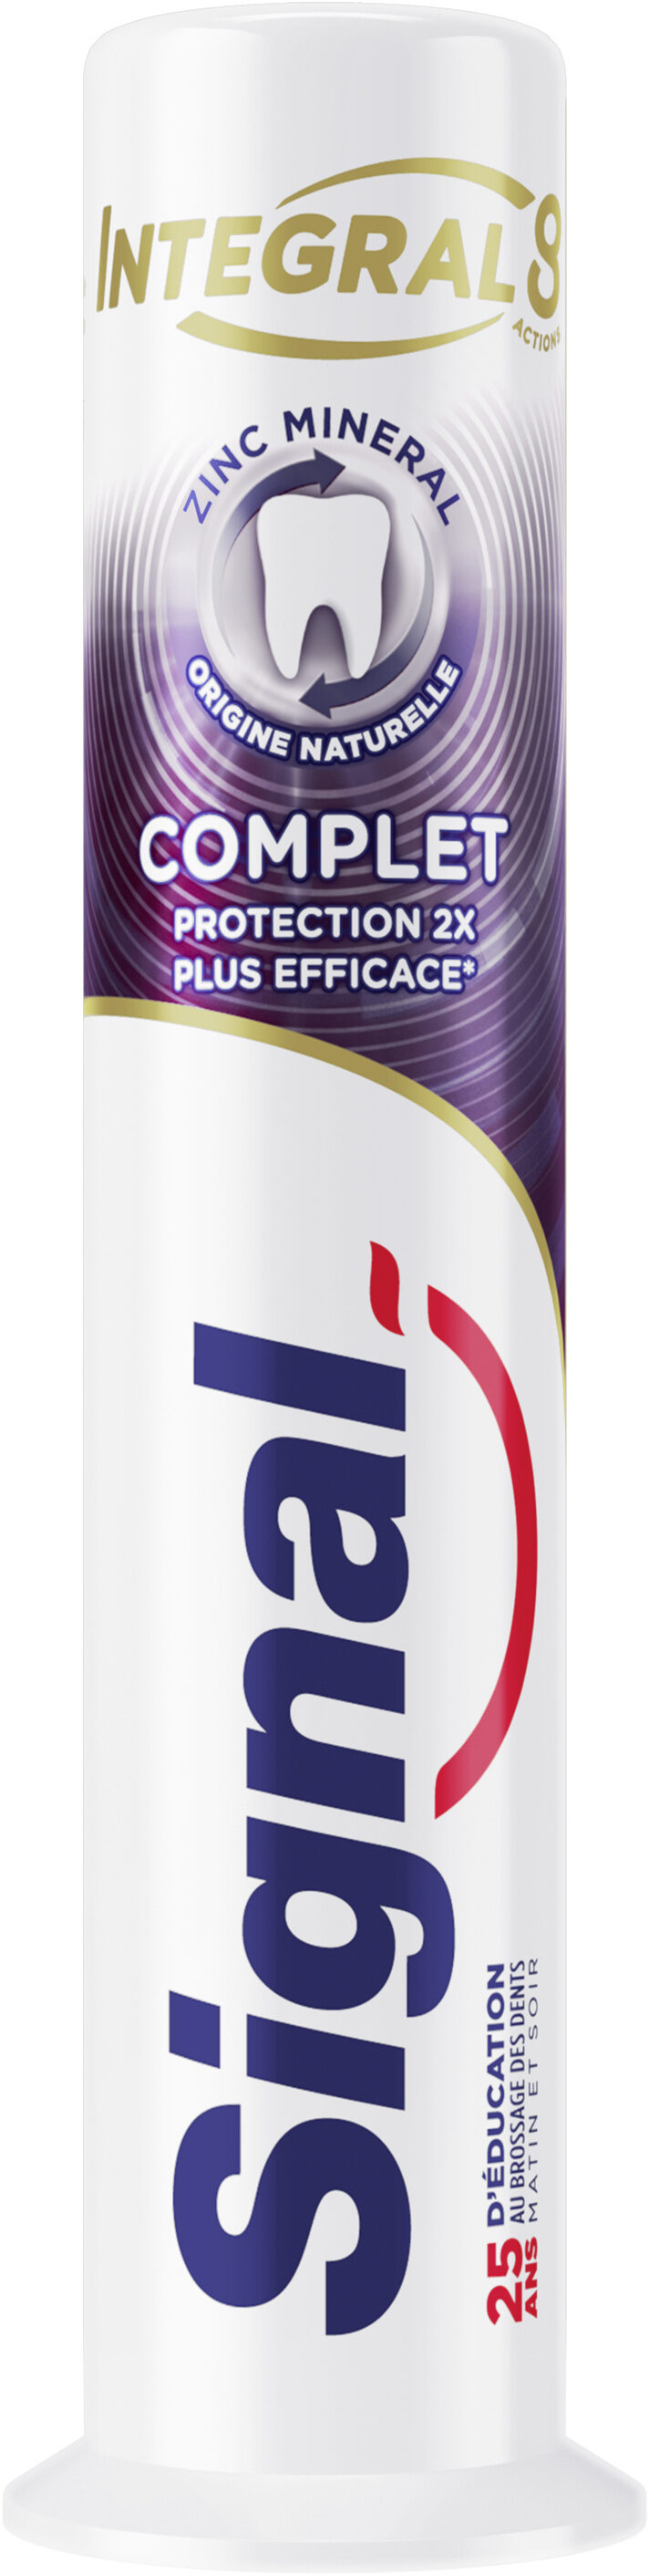 Signal Dentifrice Integral 8 Complet Doseur - Product - fr